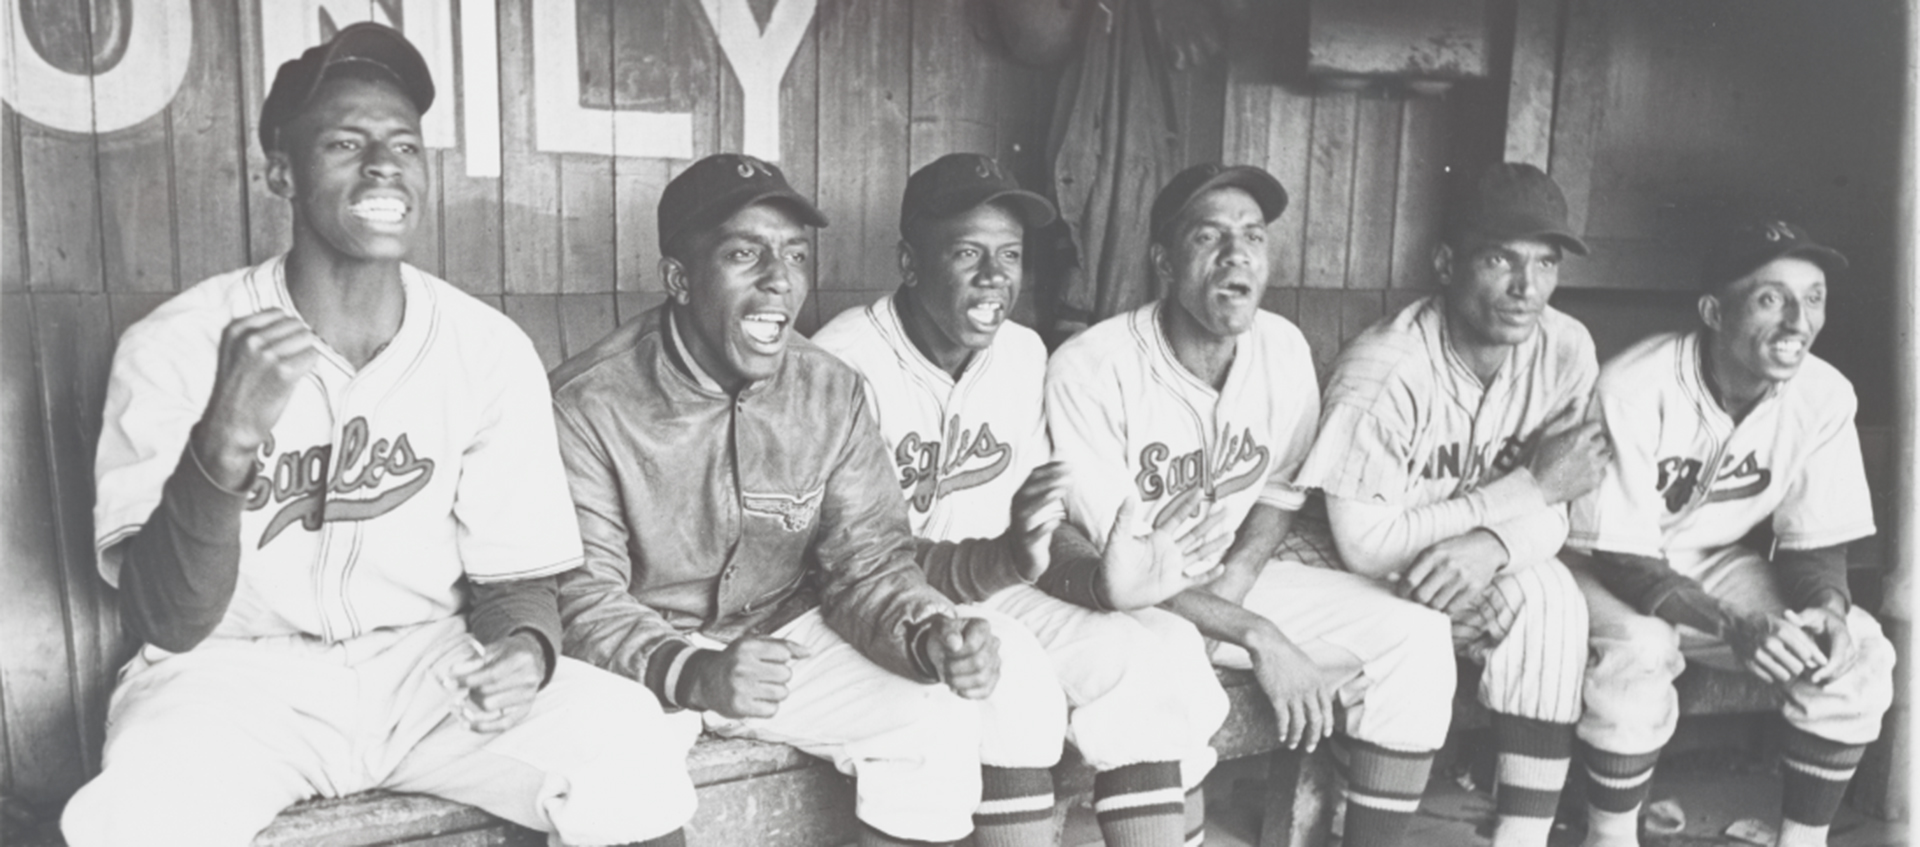 Six Black men in Newark Eagles baseball uniforms excitedly cheer on their team from a bench in the dugout.  